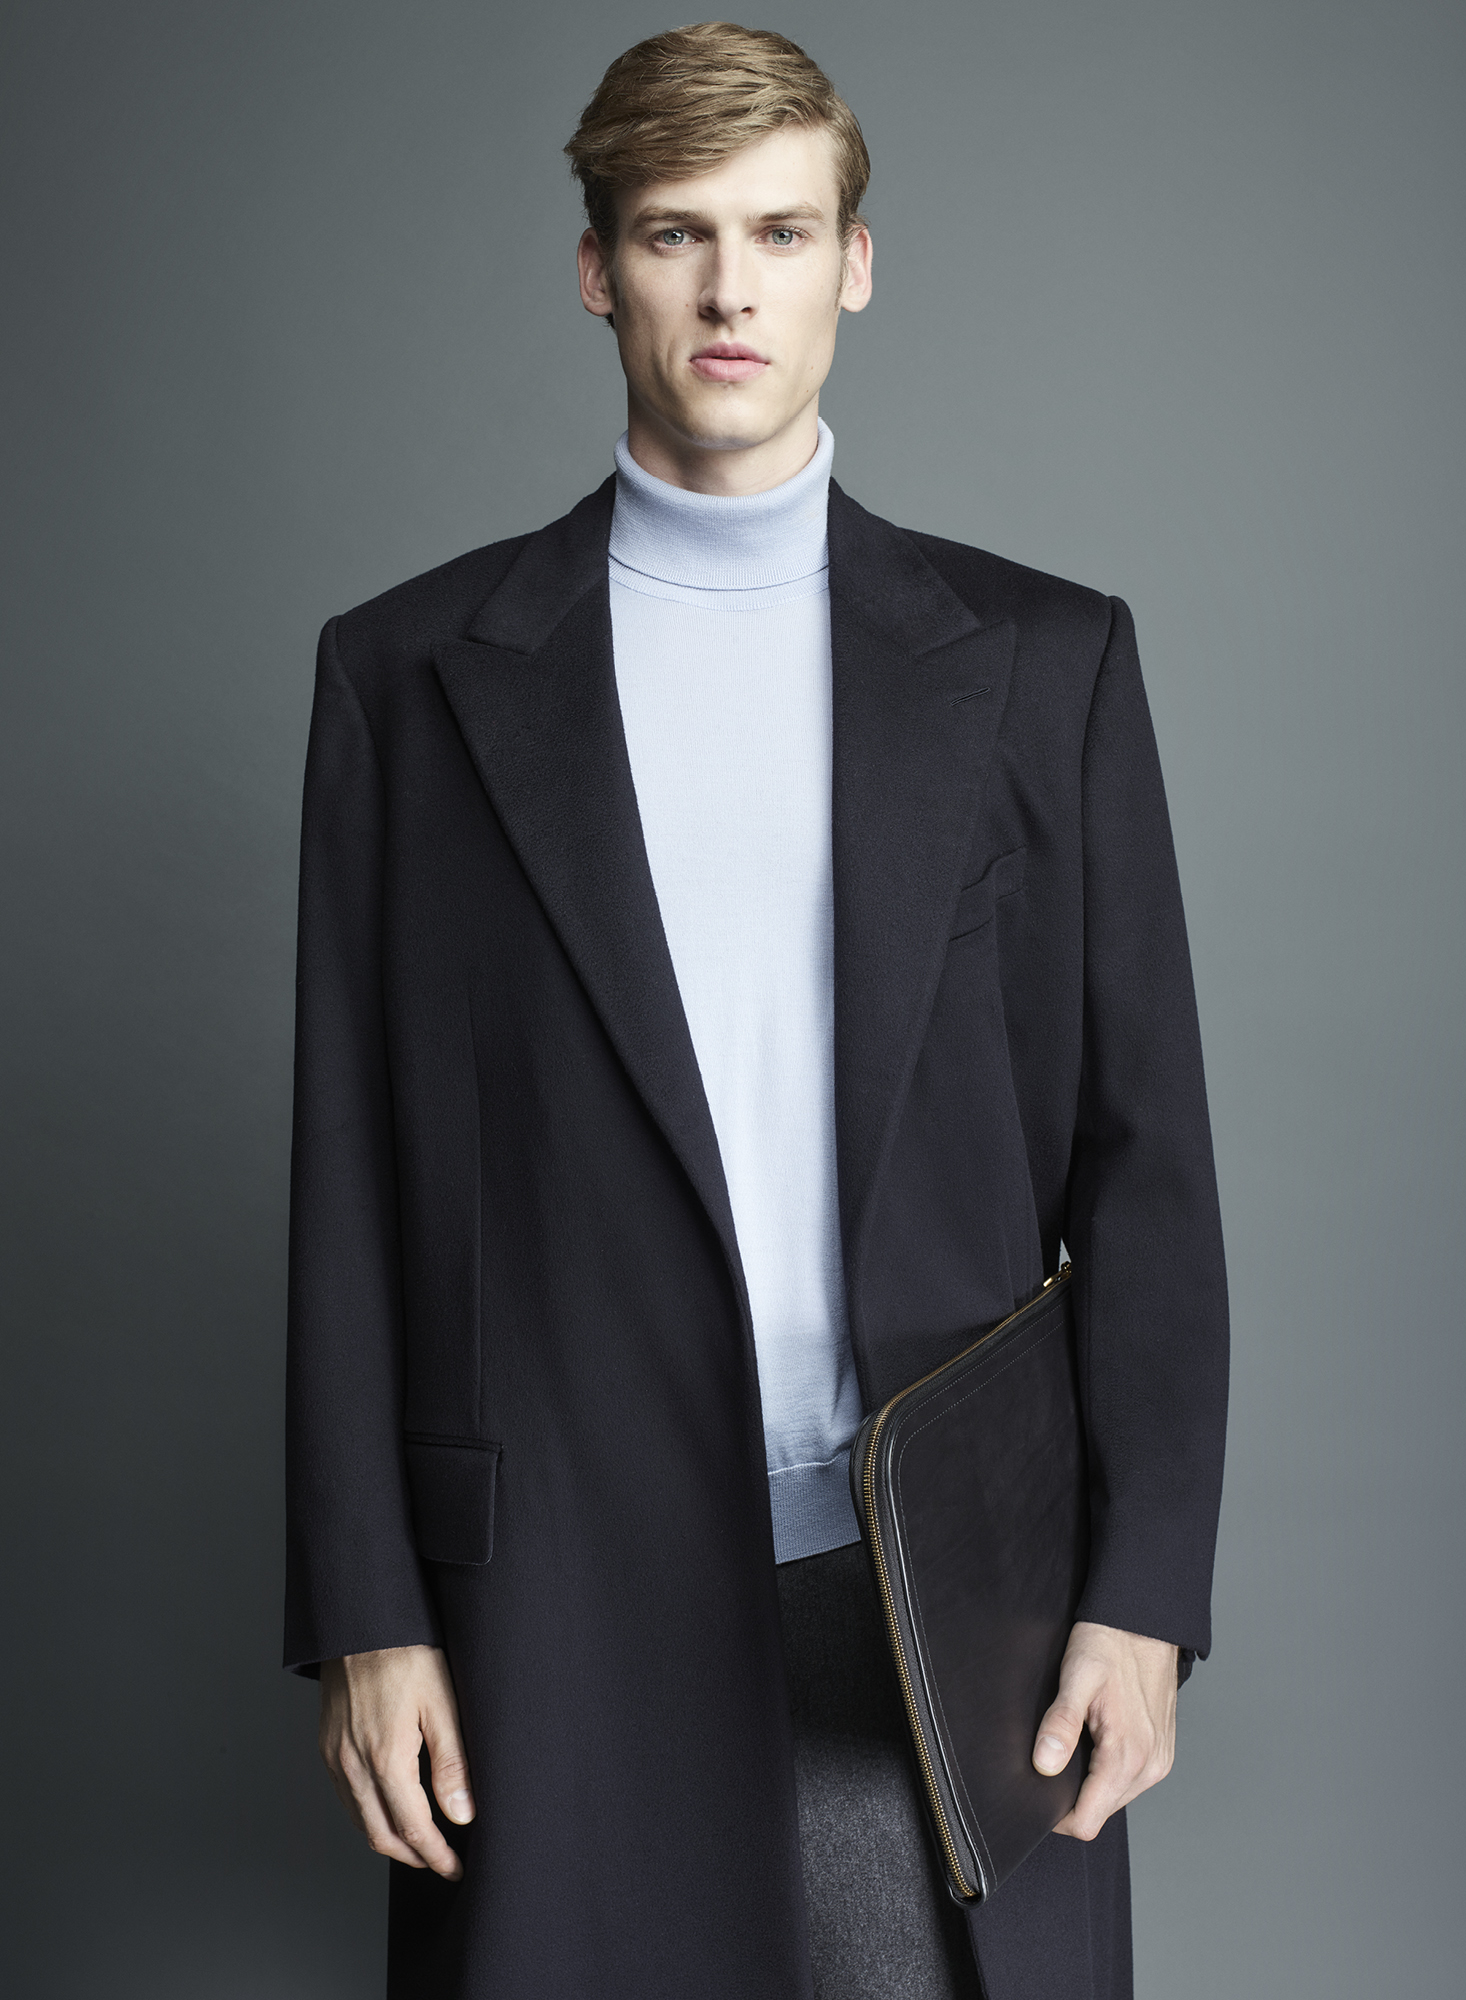 Five ways: How to wear the overcoat x Dunhill